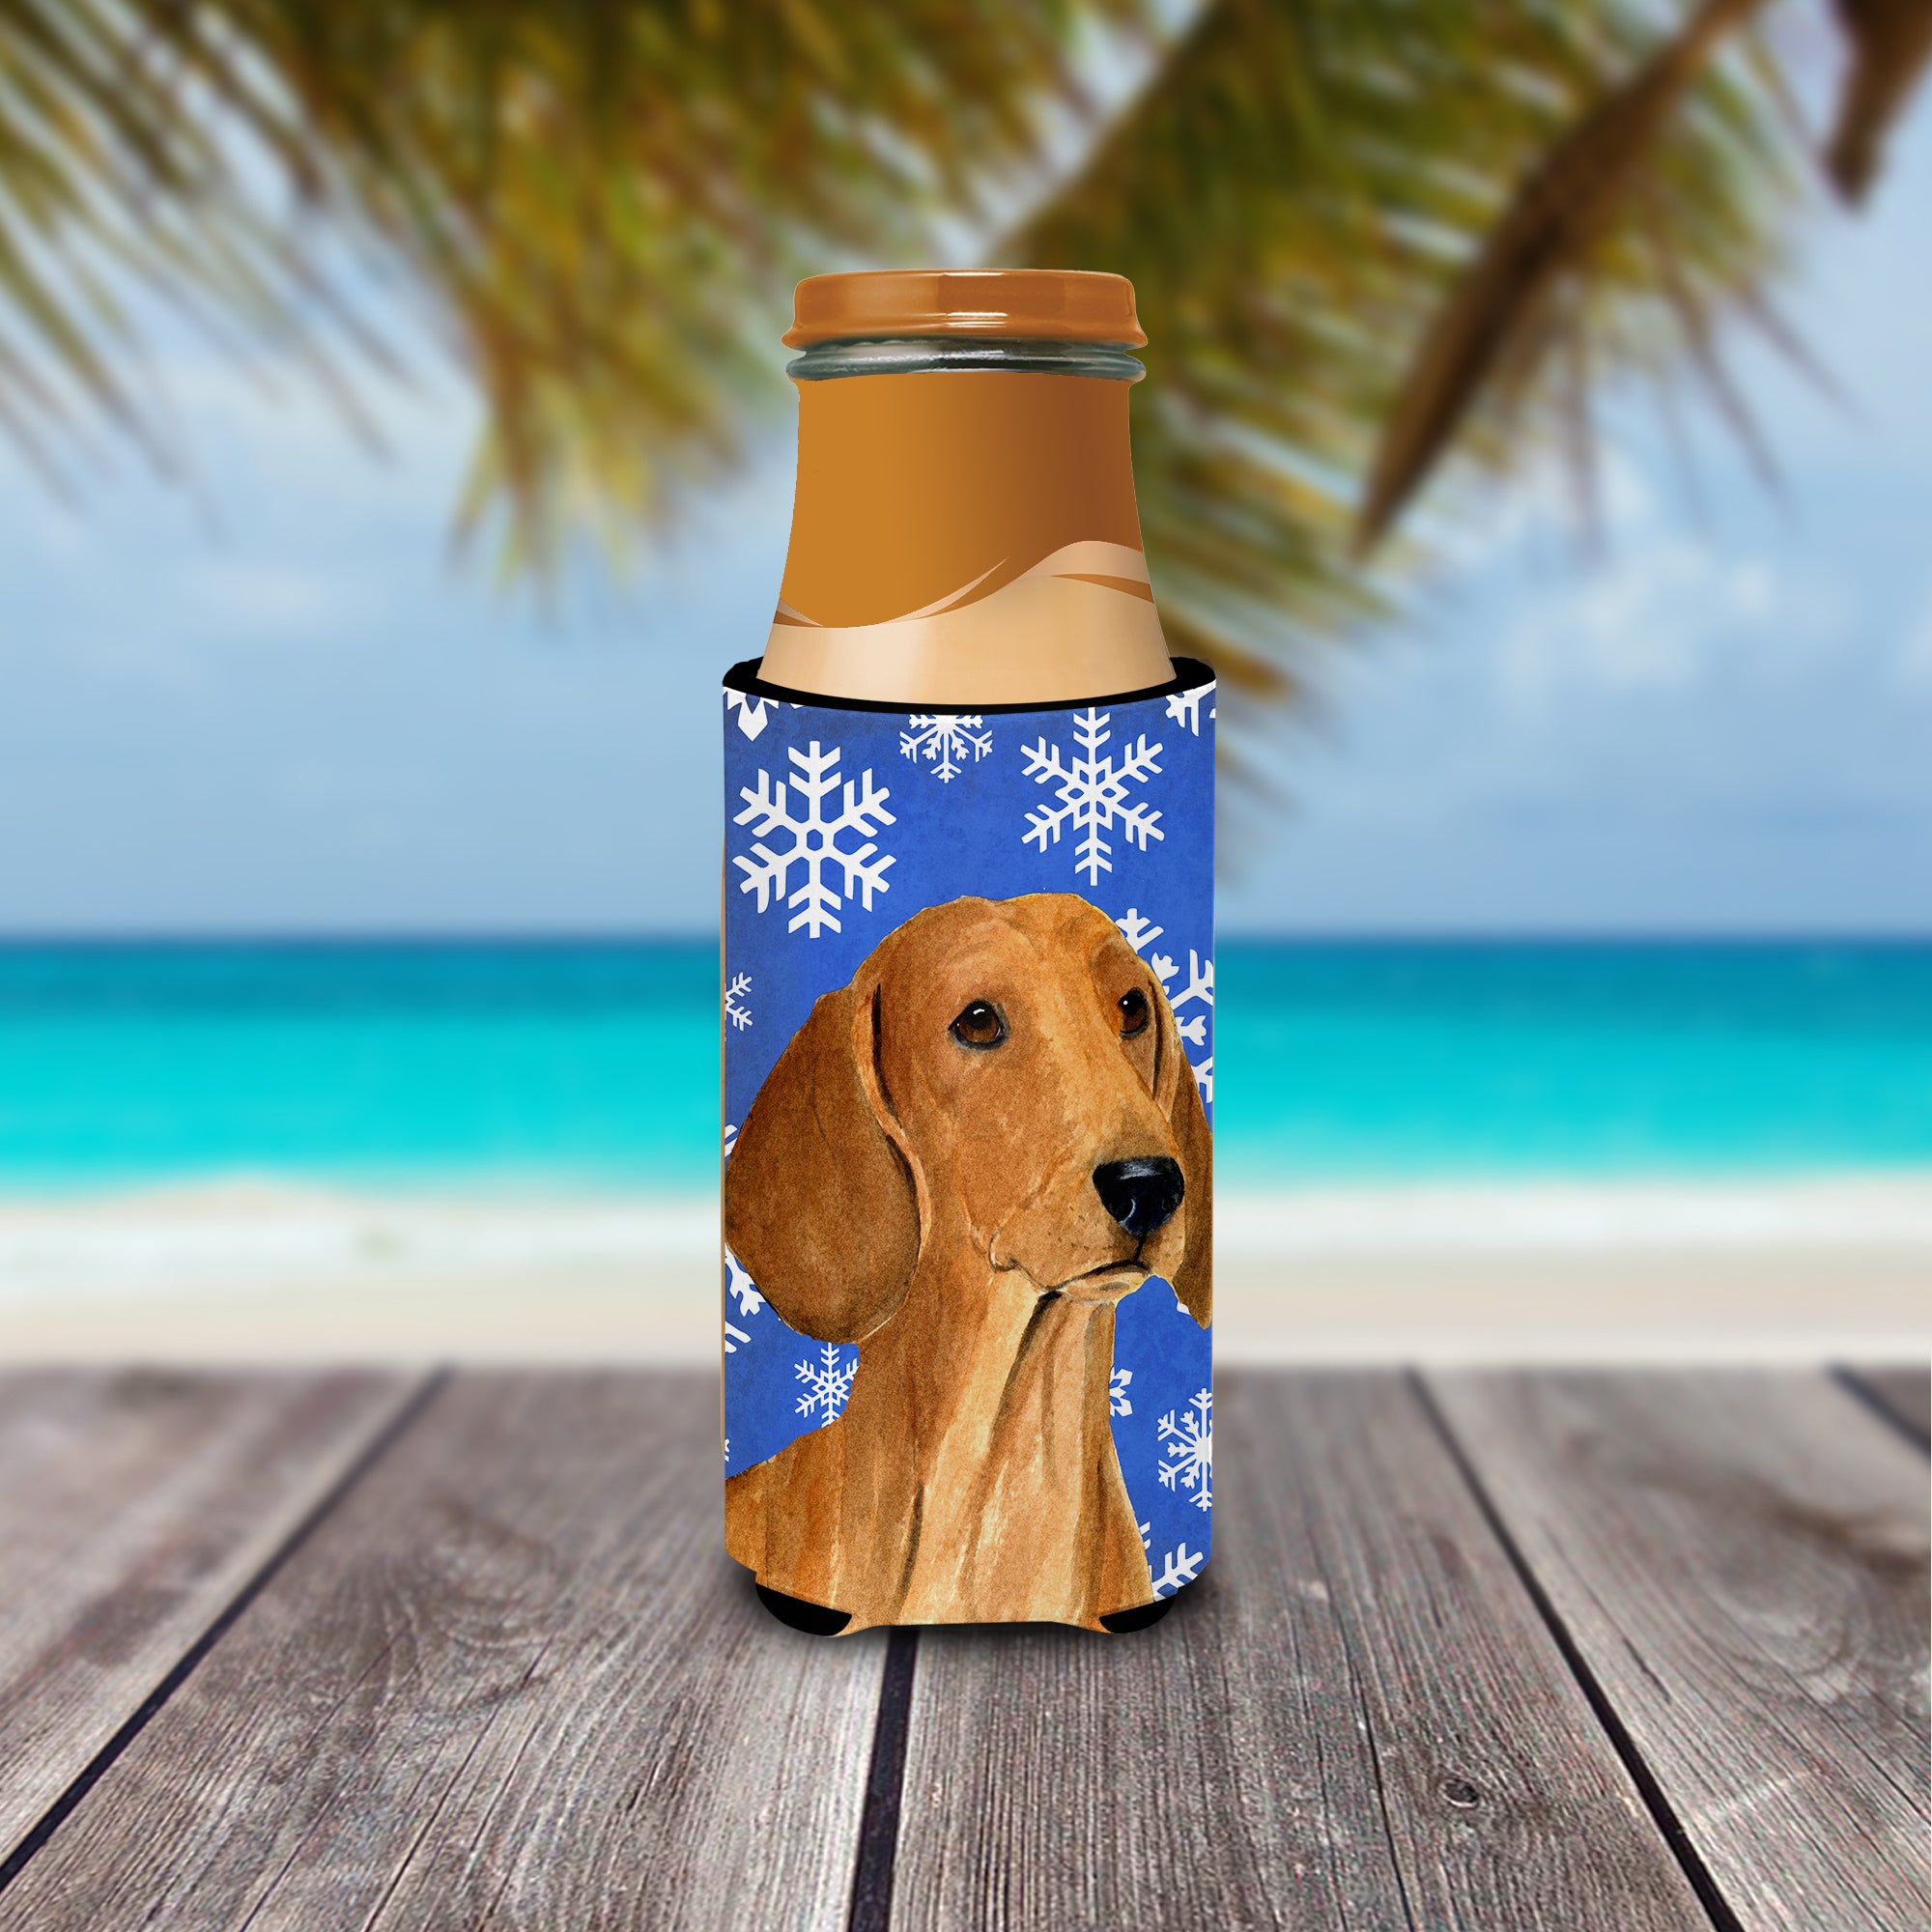 Dachshund Winter Snowflakes Holiday Ultra Beverage Insulators for slim cans SS4625MUK.